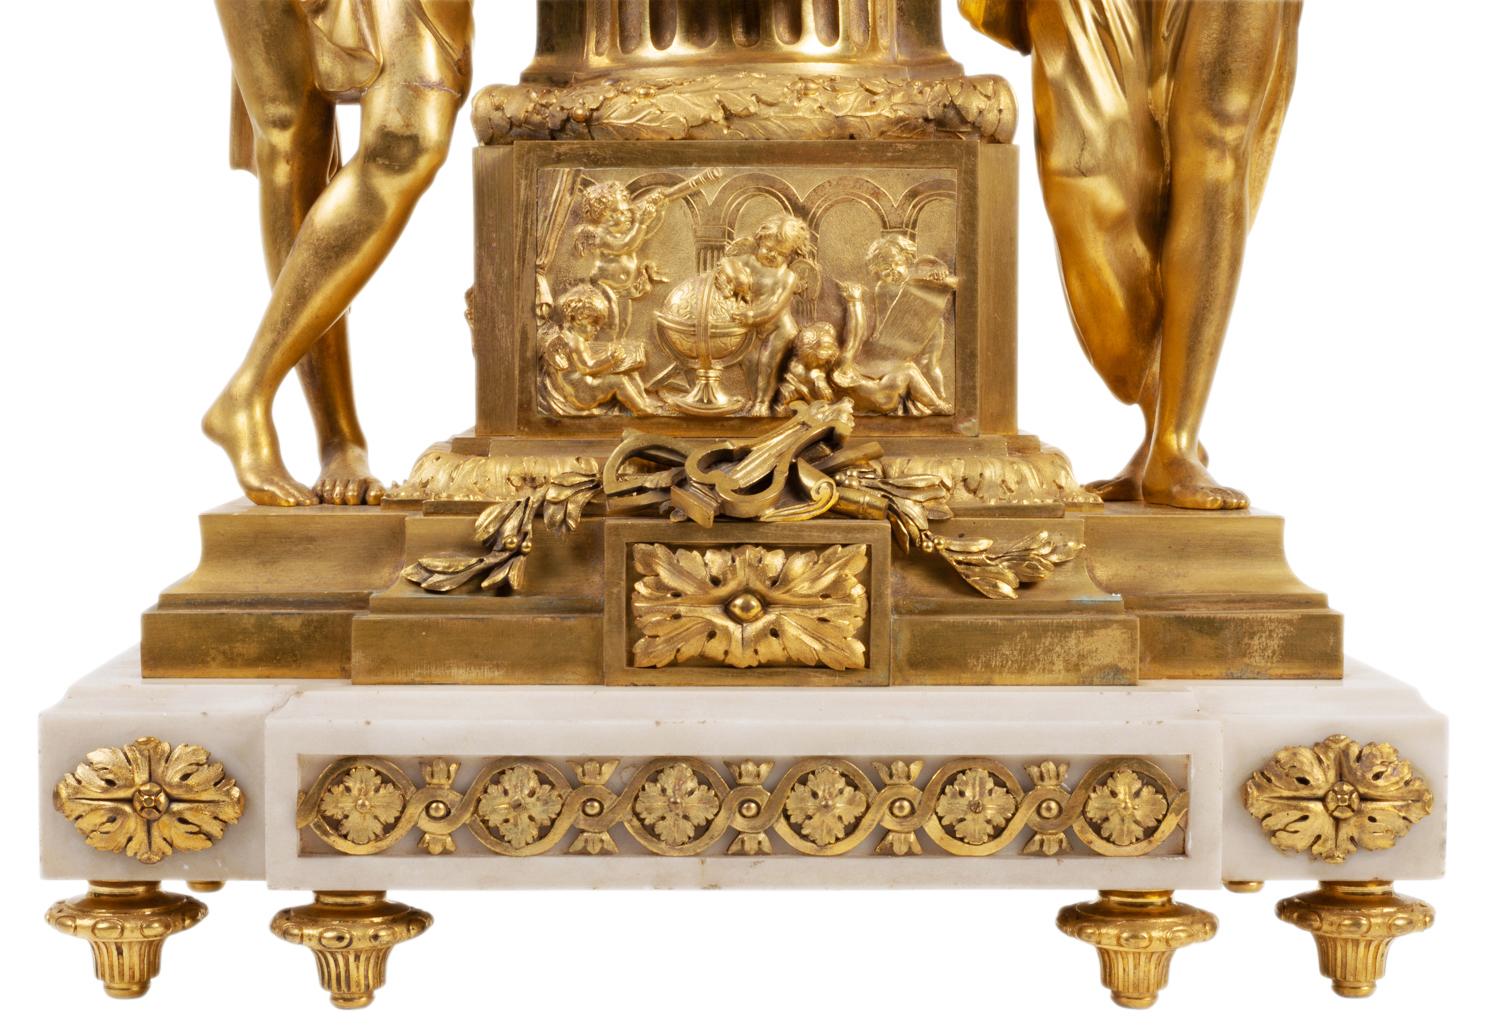 French Large Louis XVI Style Ormolu Mantel Clock, 19th Century For Sale